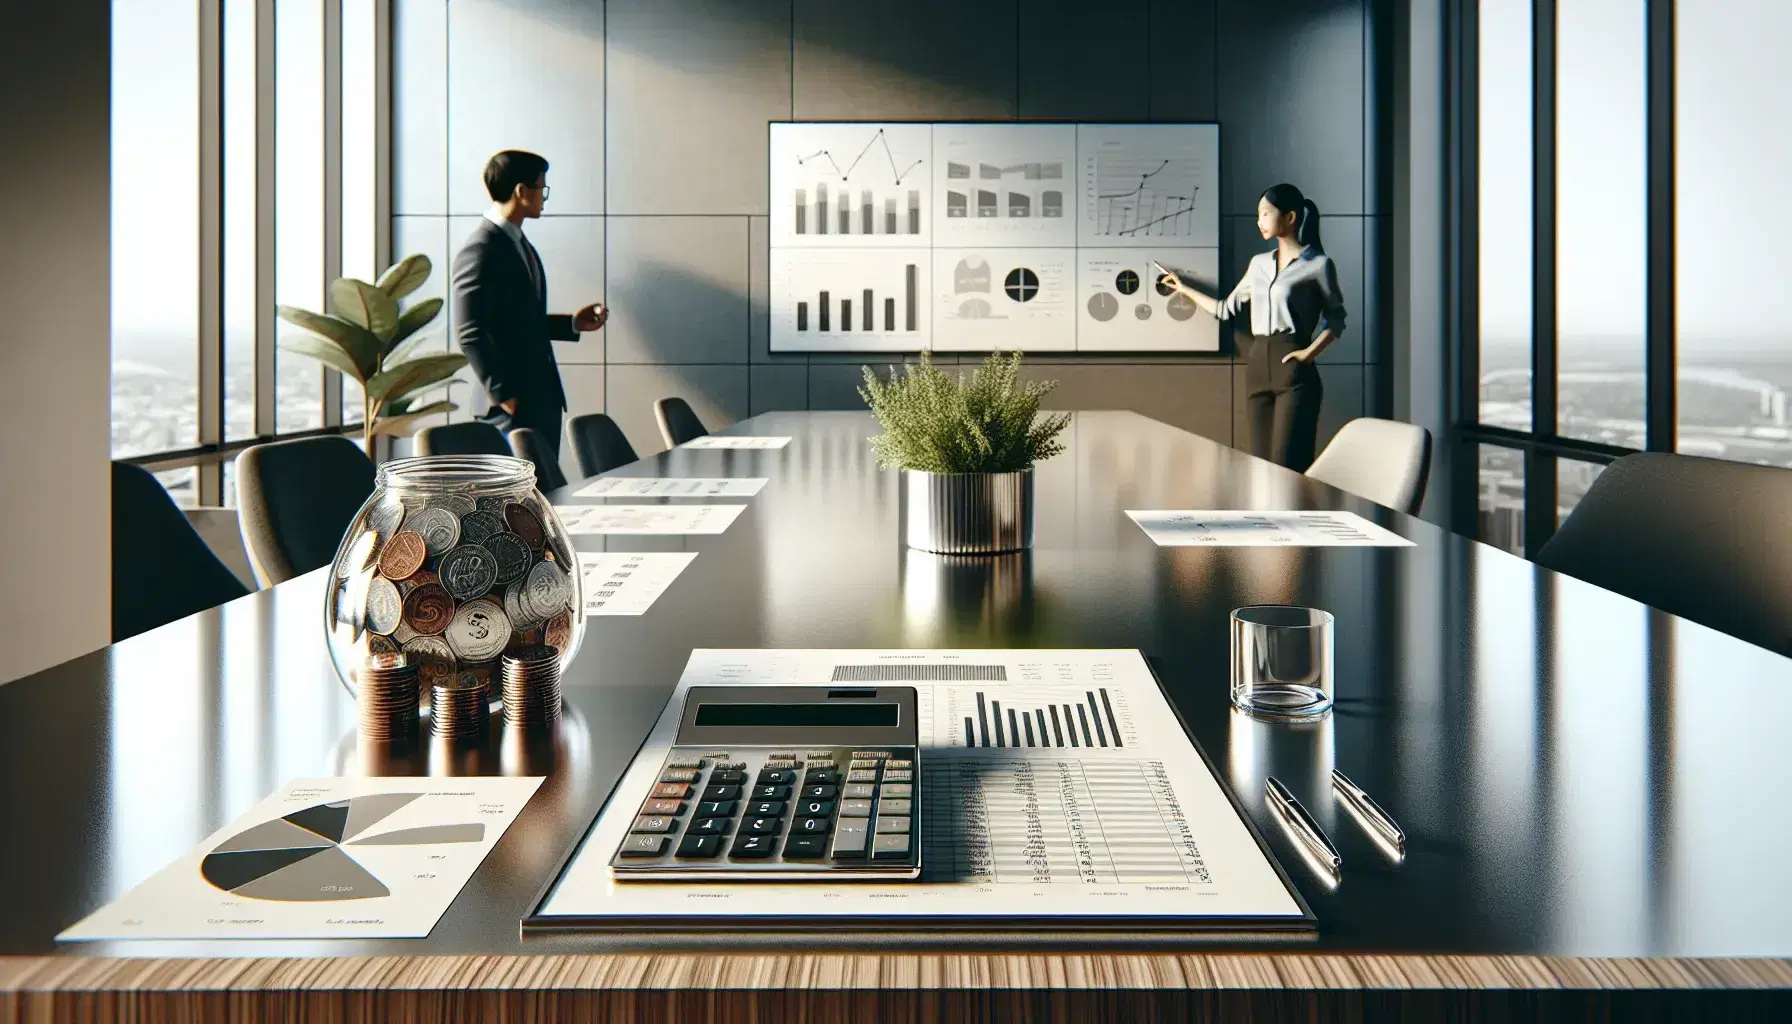 Modern office setting with a wooden table featuring financial tools, a calculator, printed charts, a coin jar, and a potted plant, with two professionals discussing near a whiteboard.